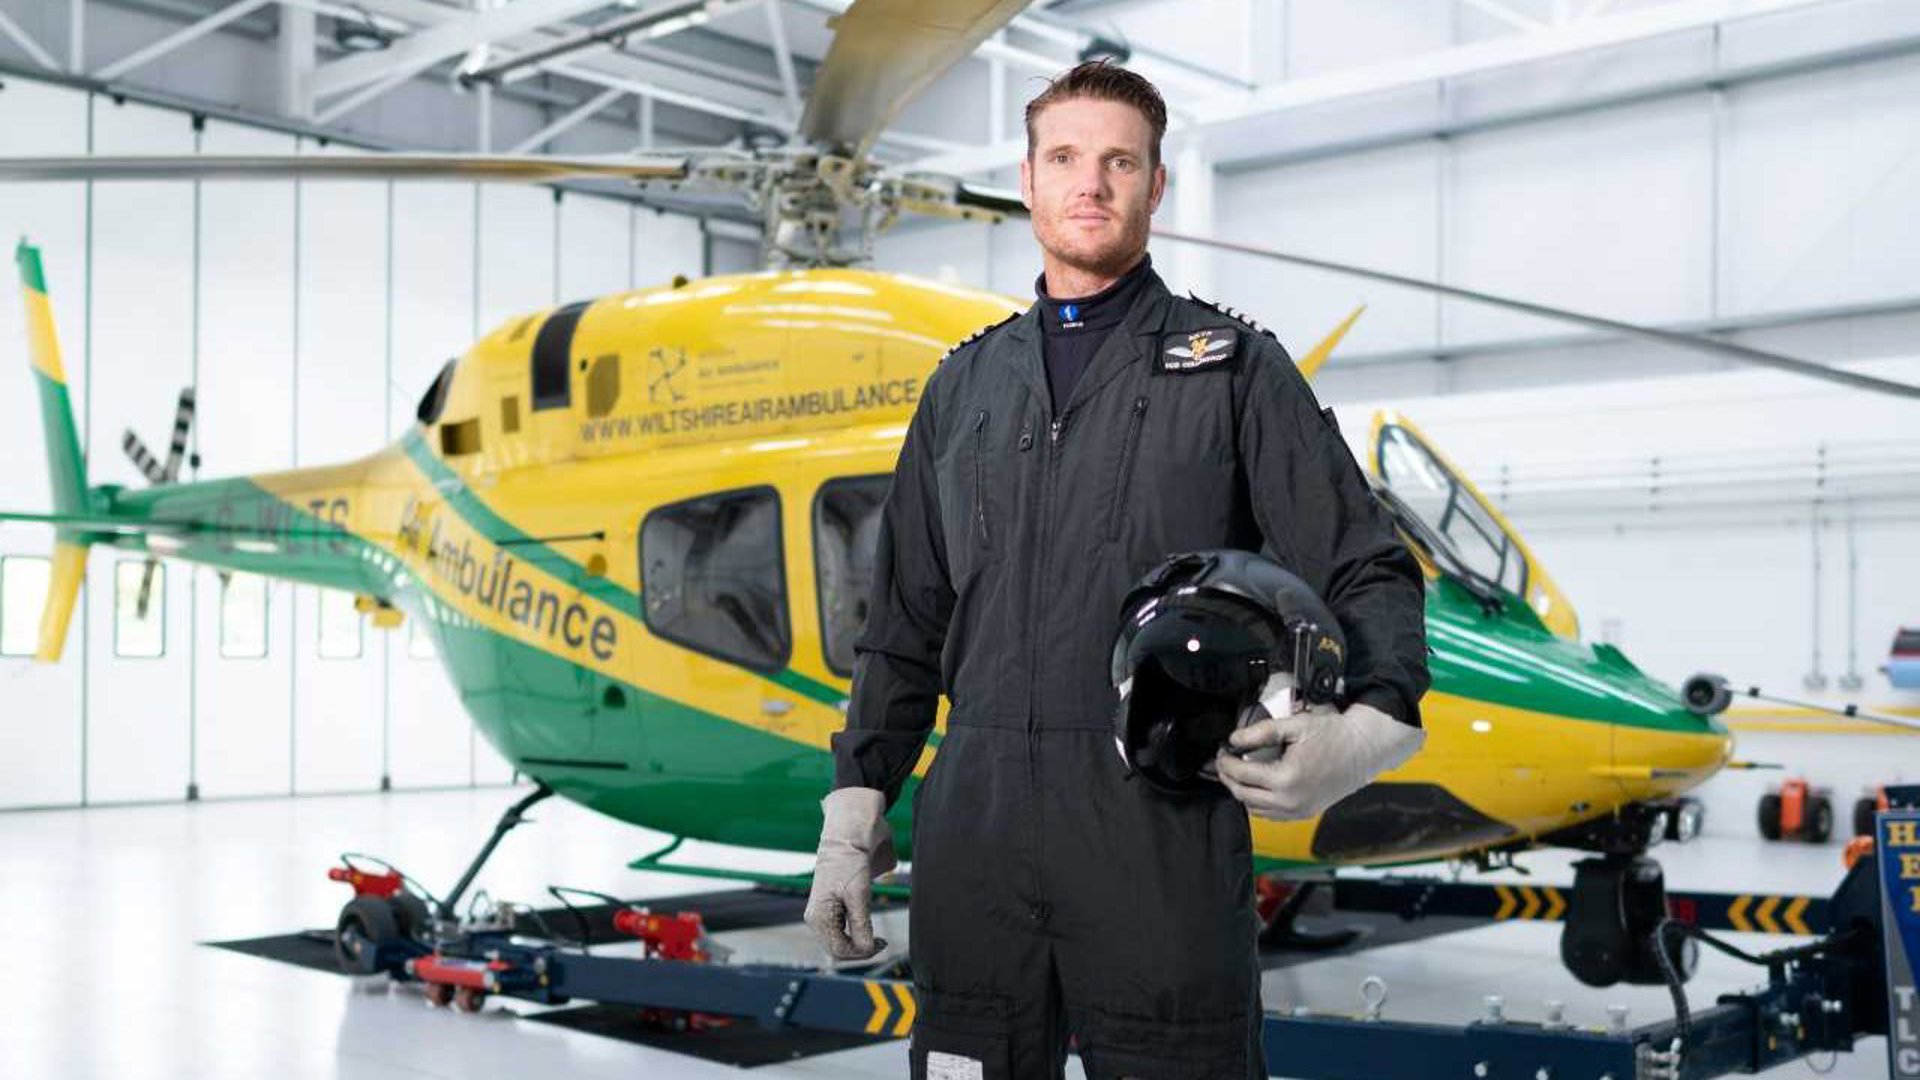 Pilot Rob Collingwood stood wearing a flight suit and holding a flight helmet in front of the helicopter in the hangar.